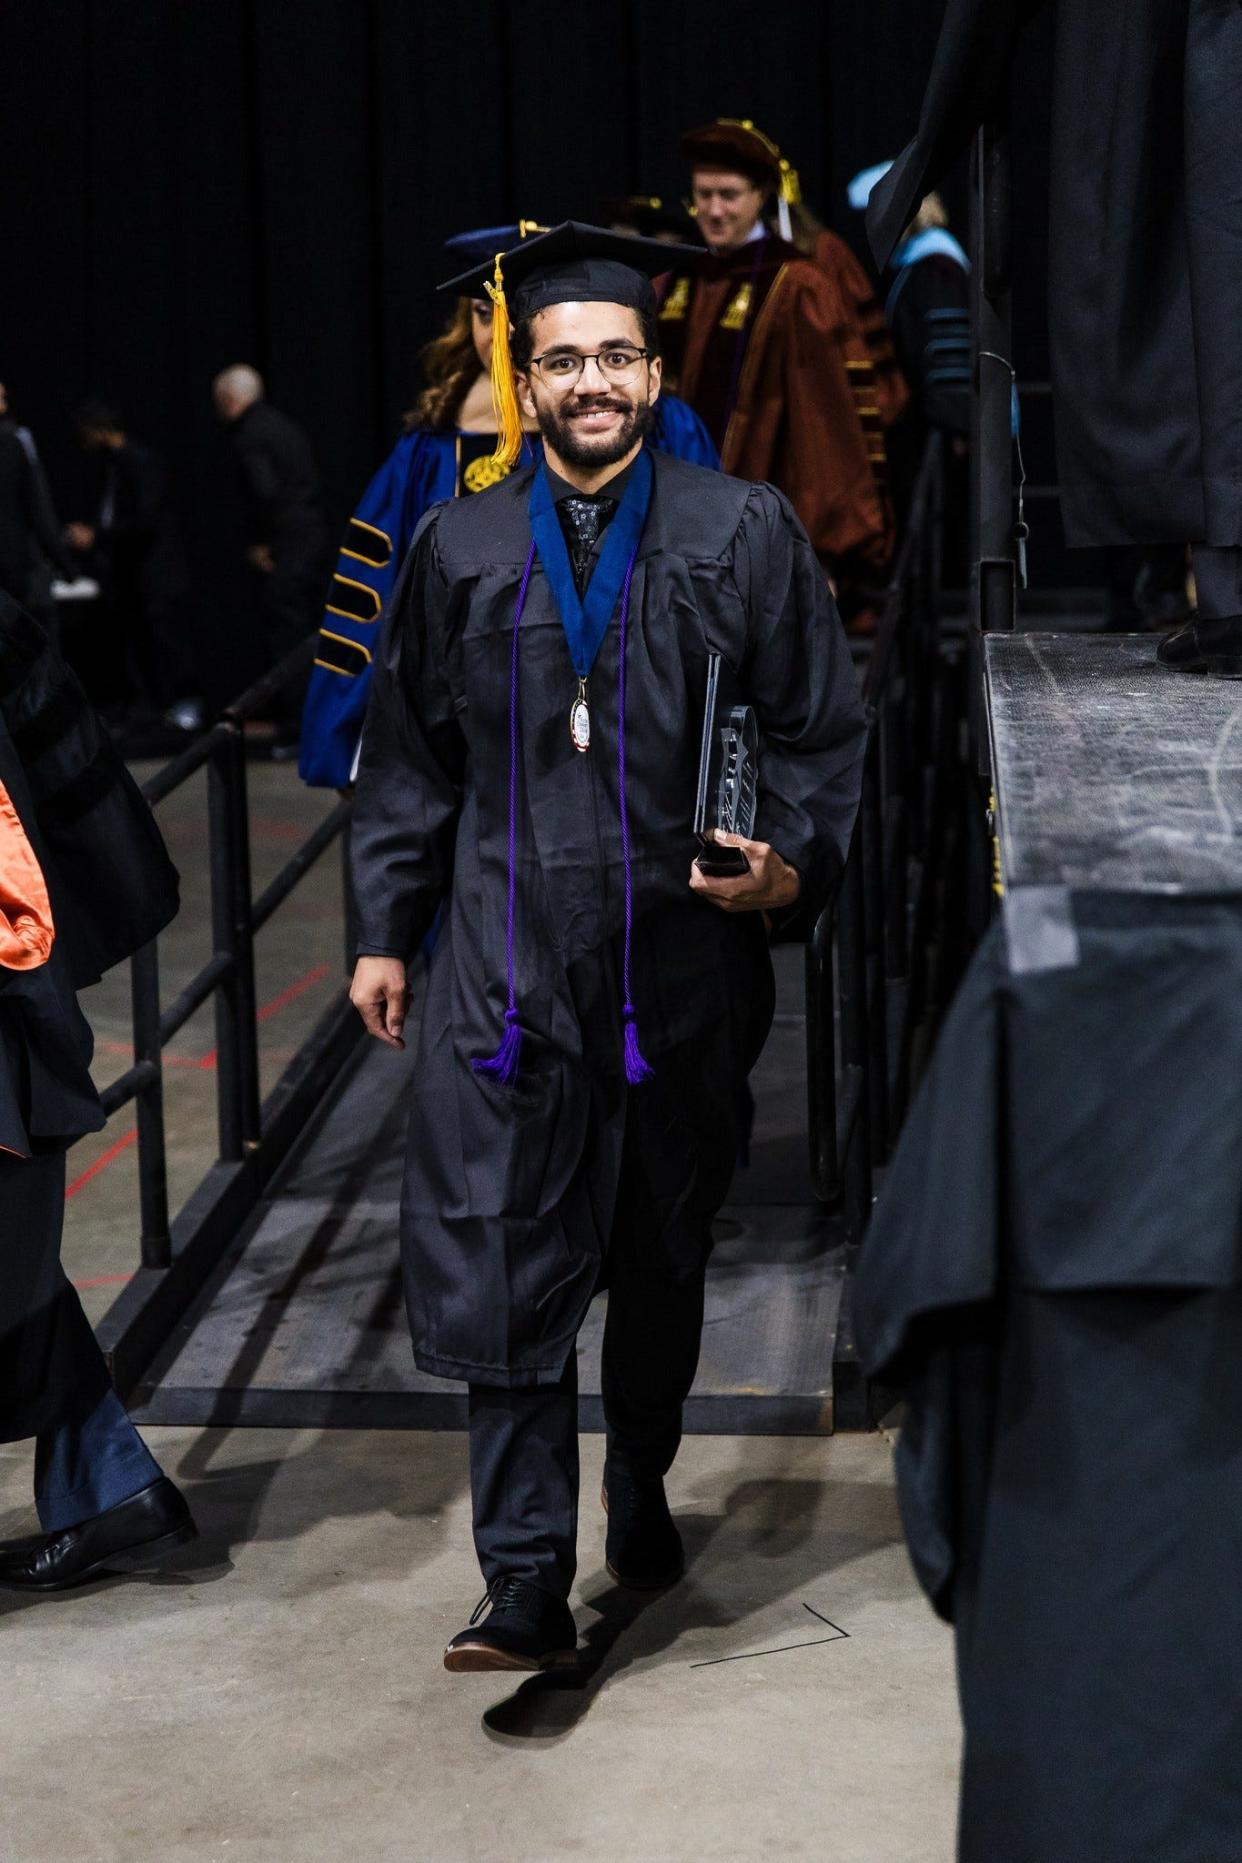 Julian Cotto, a father of two, received his associate degree of applied science in computer programming at Austin Community College's fall graduation. He also received the Chancellor’s Student Achievement Award.